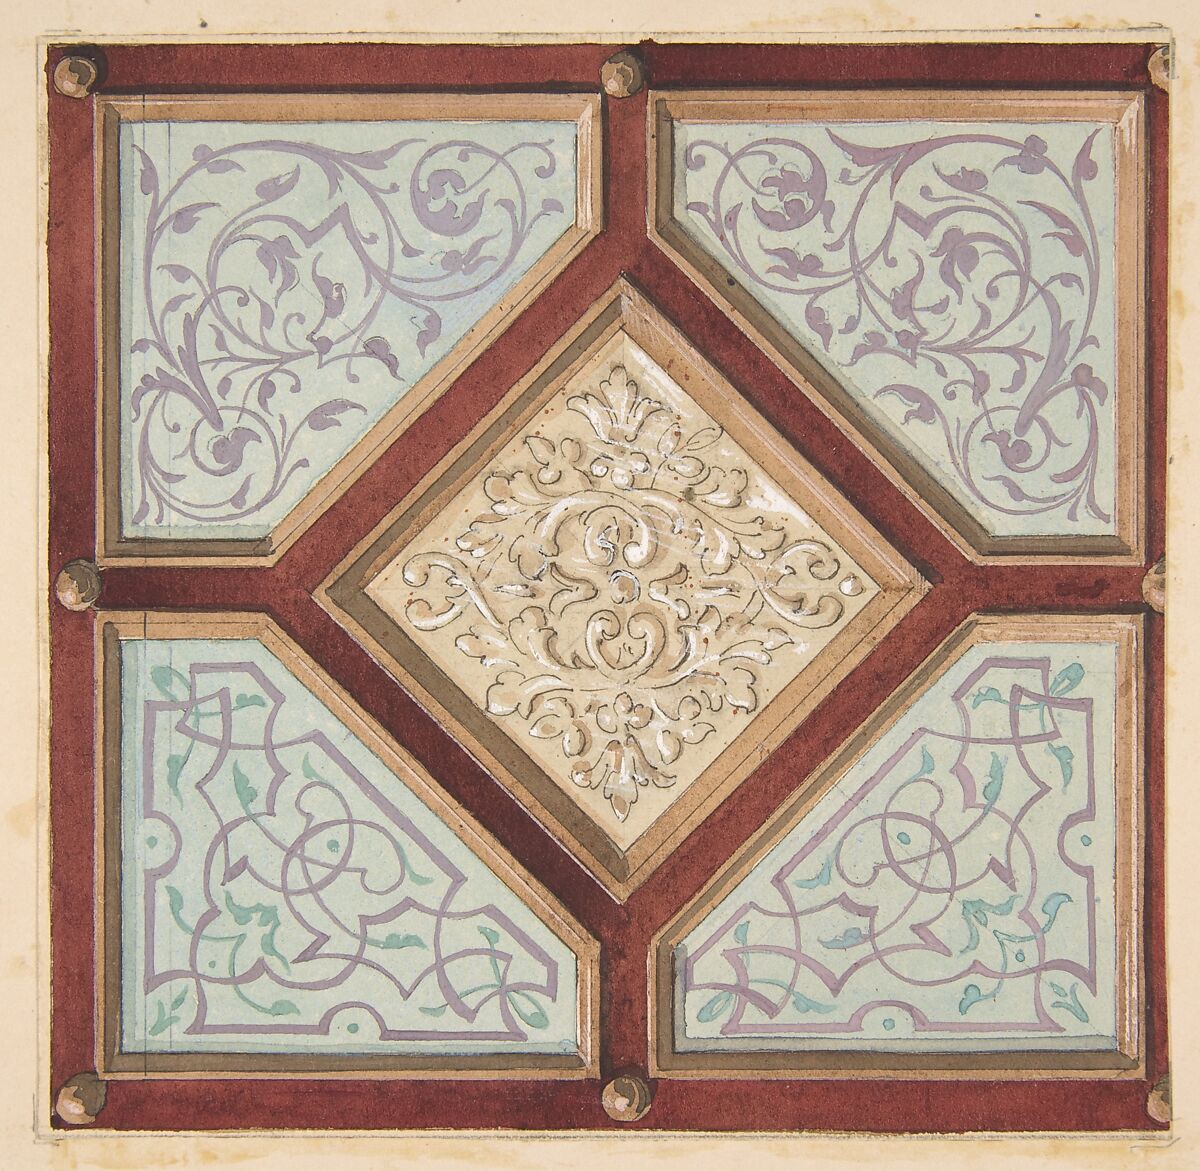 Design for a coffered ceiling with alternative decorative patterns, Jules-Edmond-Charles Lachaise (French, died 1897), Pen and ink, watercolor, and gouache on wove paper; inlaid in wove paper 